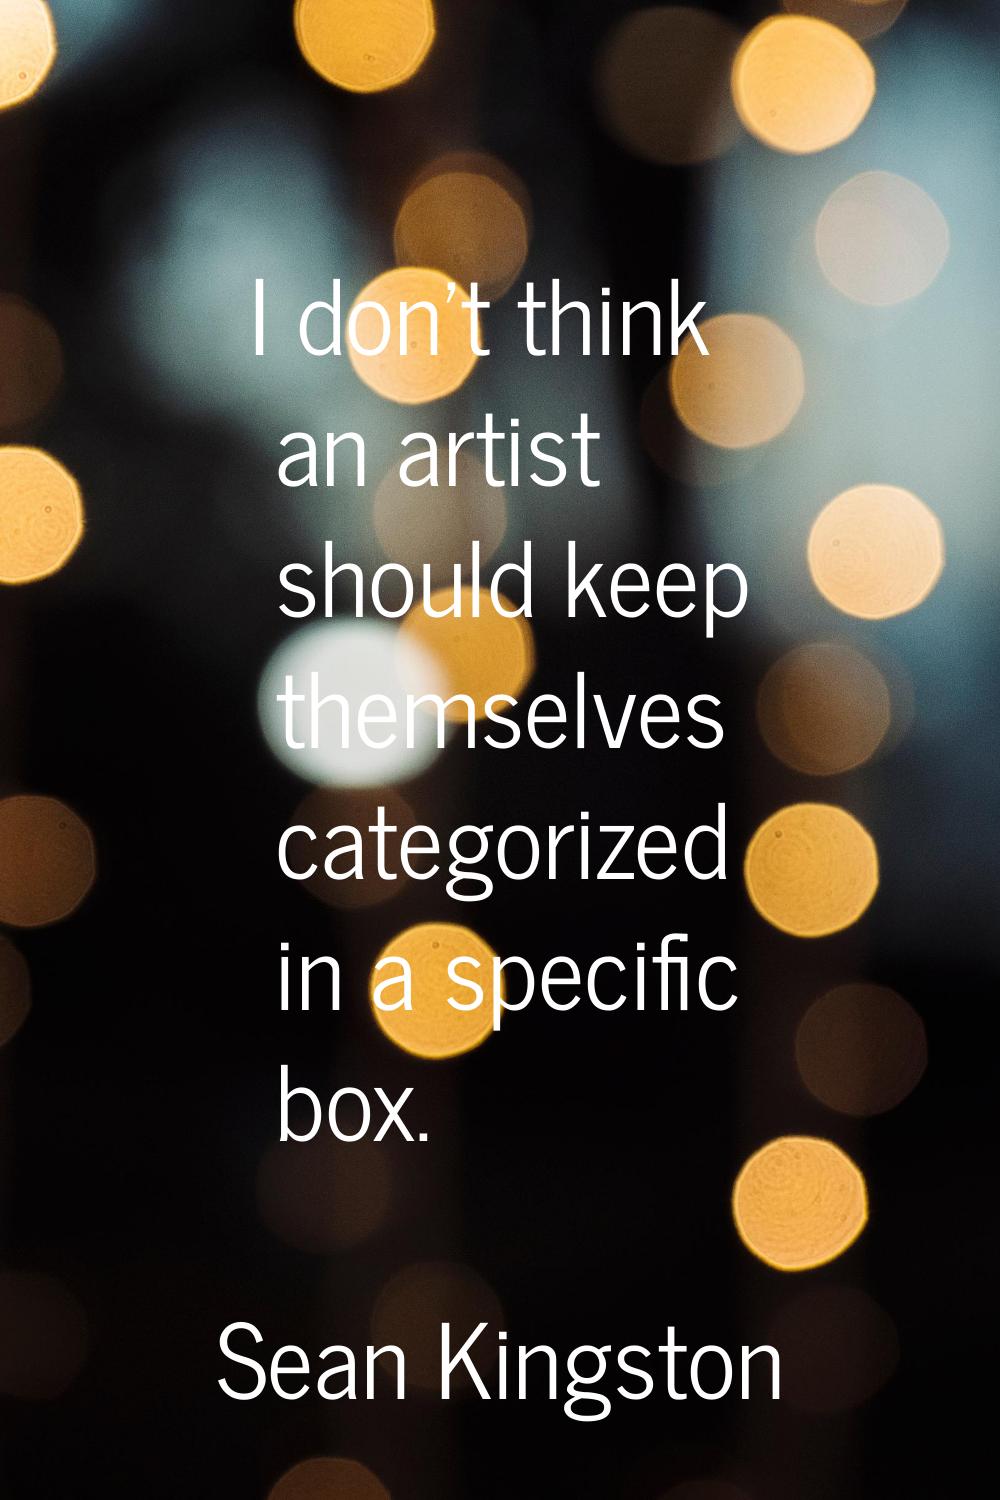 I don't think an artist should keep themselves categorized in a specific box.